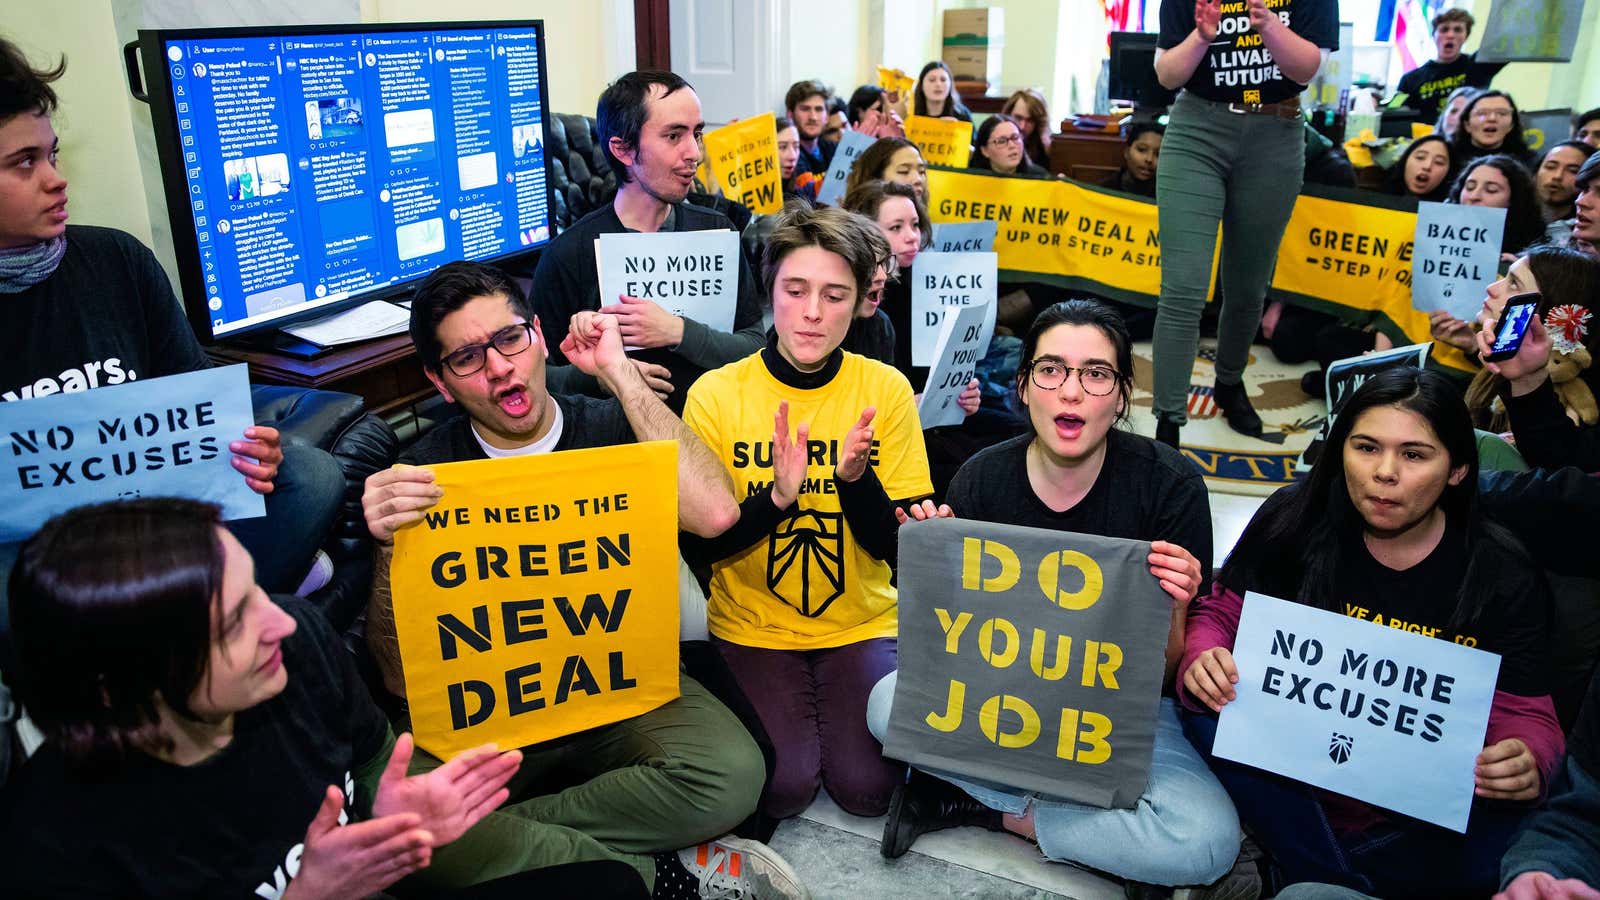 Activists from the Sunrise Movement have been occupying congressional offices to get Green New Deal support from Democrats.